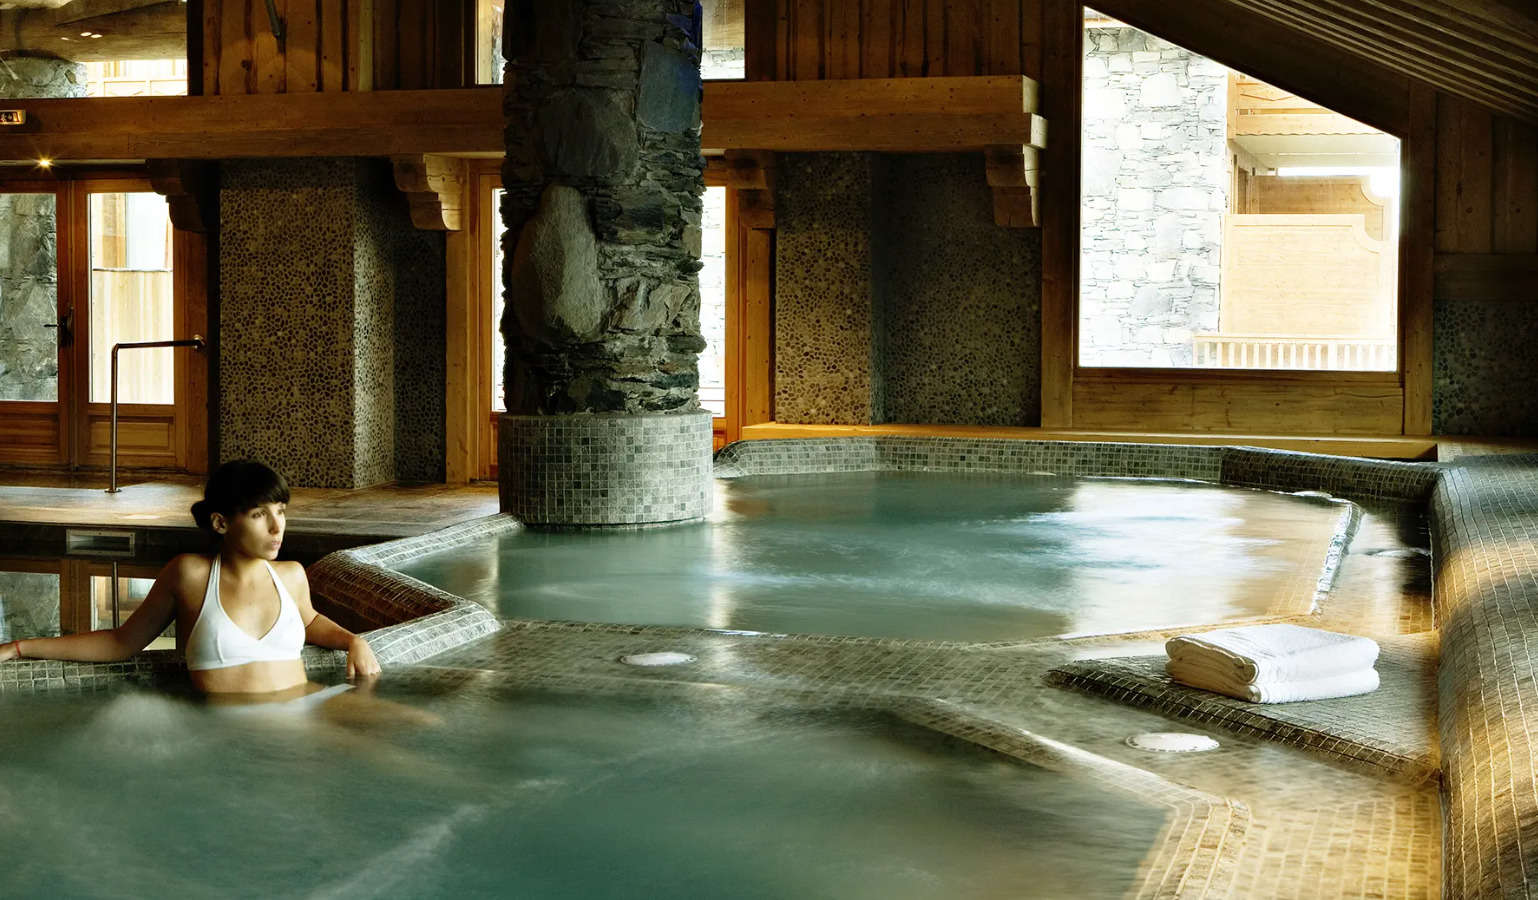 An image of the Jacuzzis at Les Cimes Blanches La Rosiere